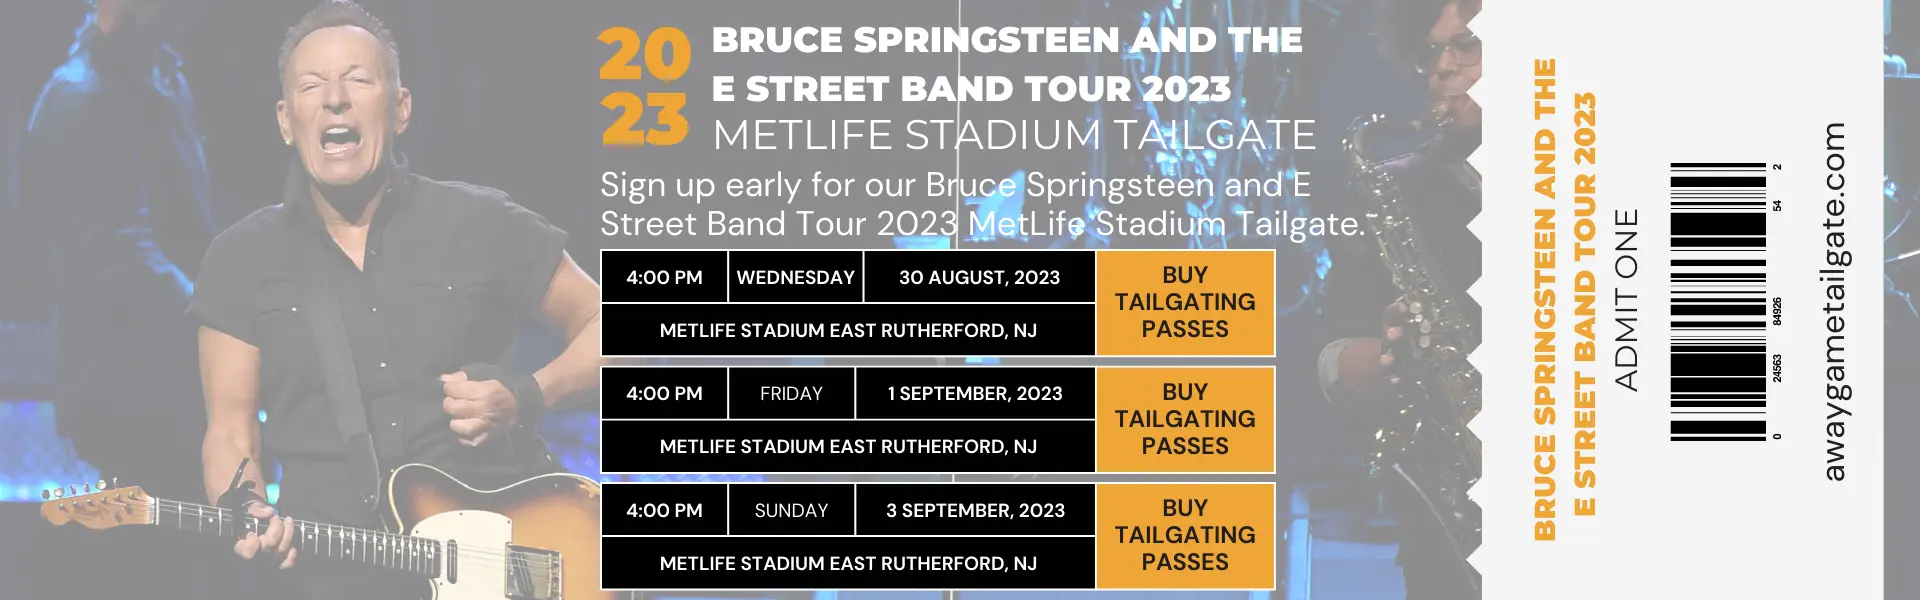 Bruce Springsteen and the E Street Band Tour 2023 MetLife Stadium Tailgate